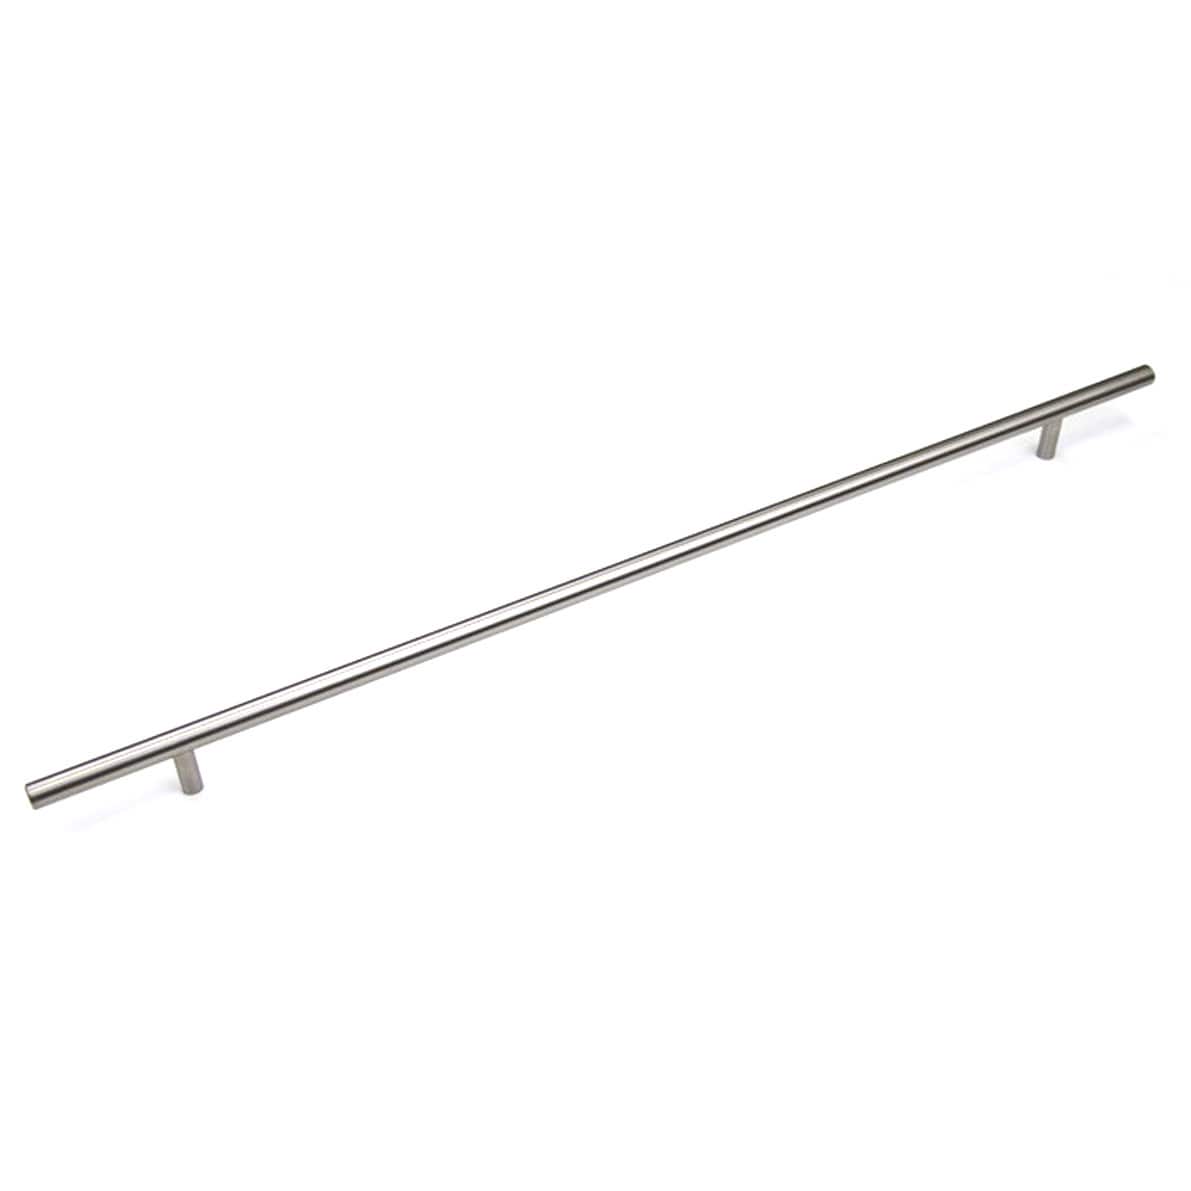 24" Solid Stainless Steel Cabinet Bar Pull Handles 24-inch (600mm) 100-percent Solid Stainless Steel Cabinet Bar Pull Handles 24-inches (Set of 4) - image 2 of 4